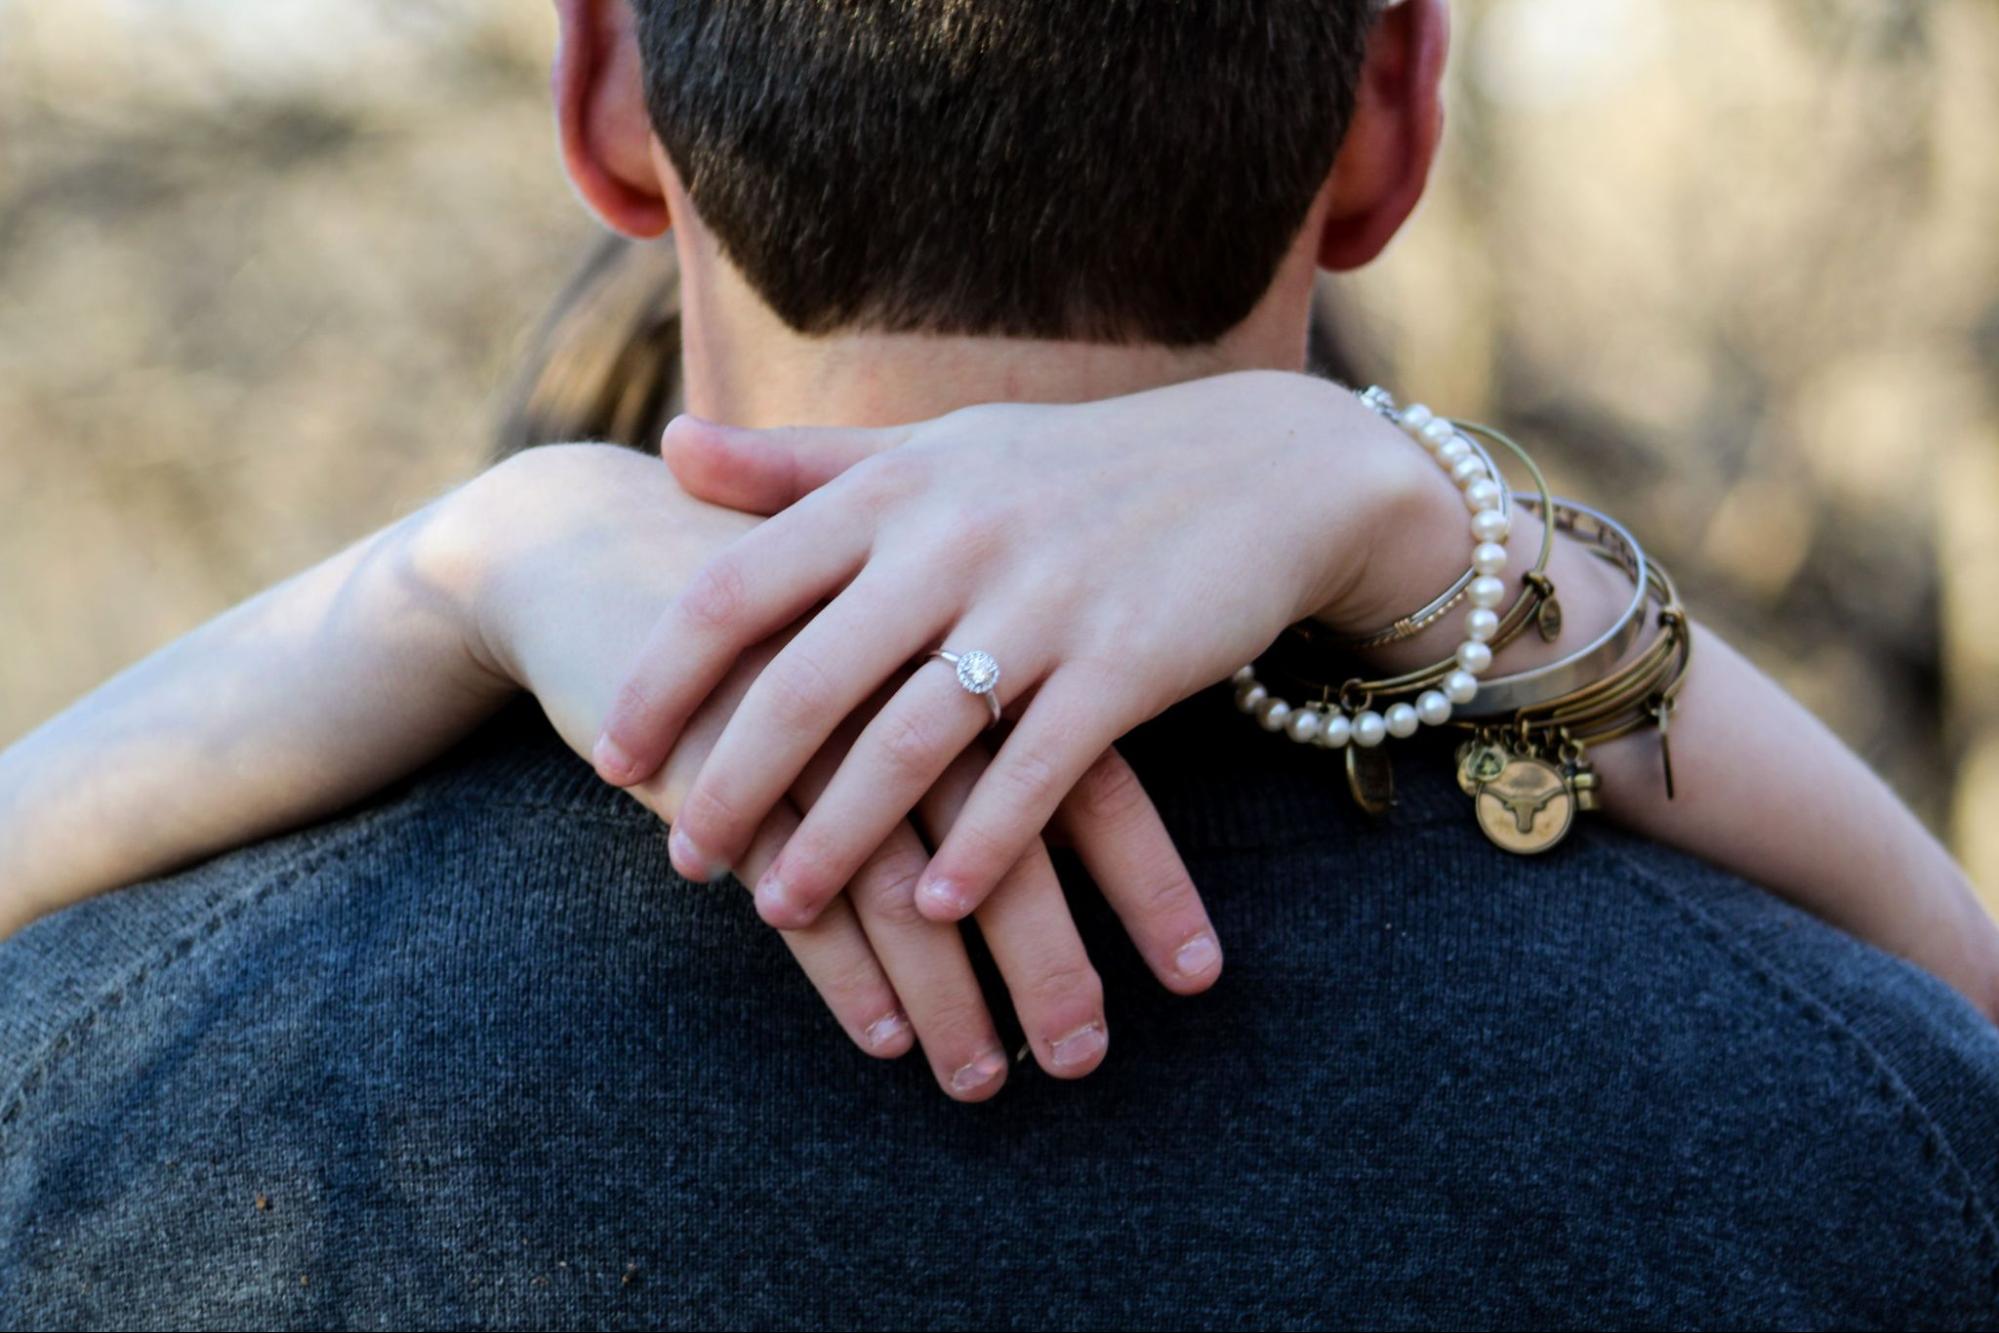 A woman wraps her arms around her partner’s neck, wearing a variety of bracelets.